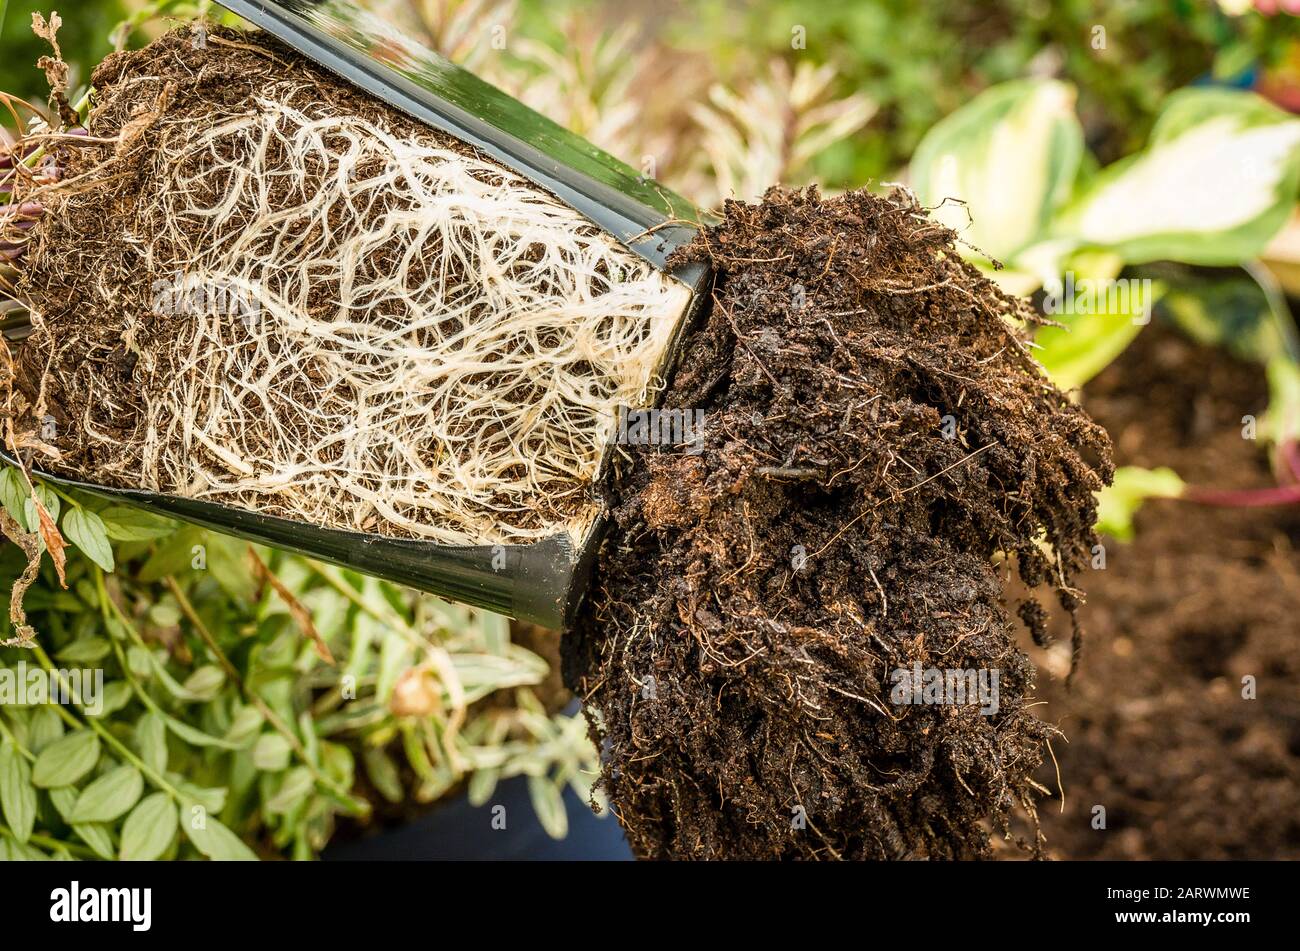 A pot-bound perennial plant with root system exposed ready to be replanted in the garden Stock Photo